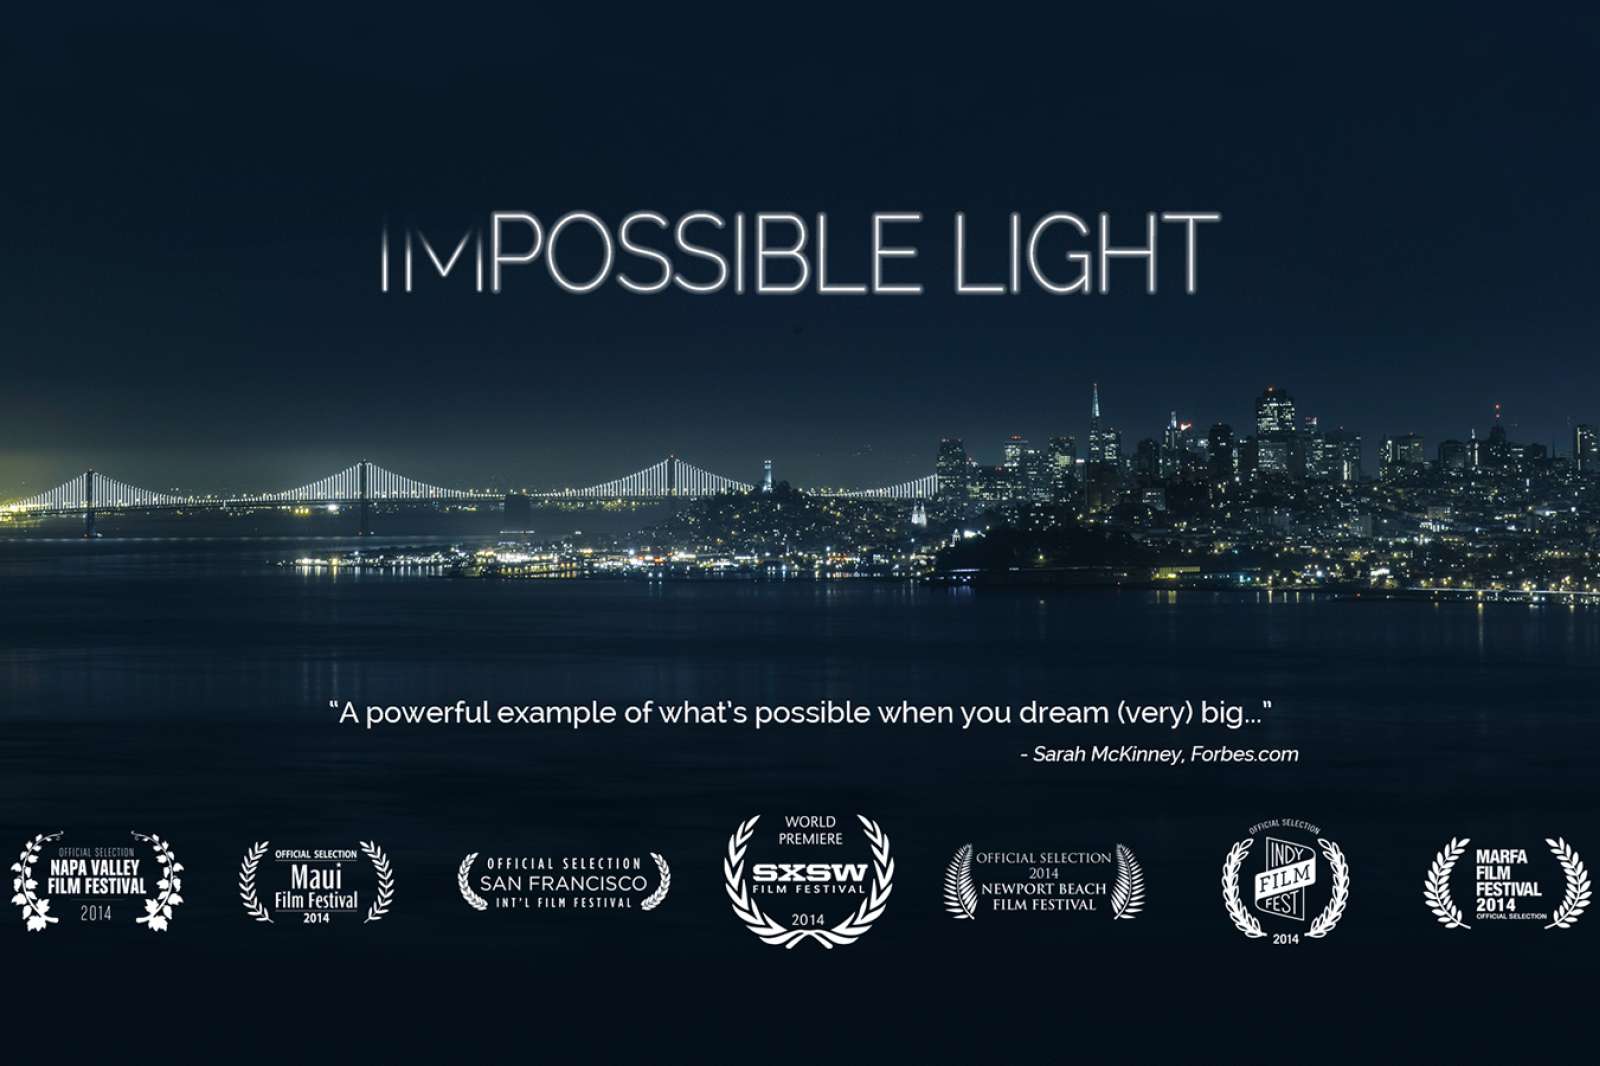 "Impossible Light" (2014). Directed by Jeremy Ambers.